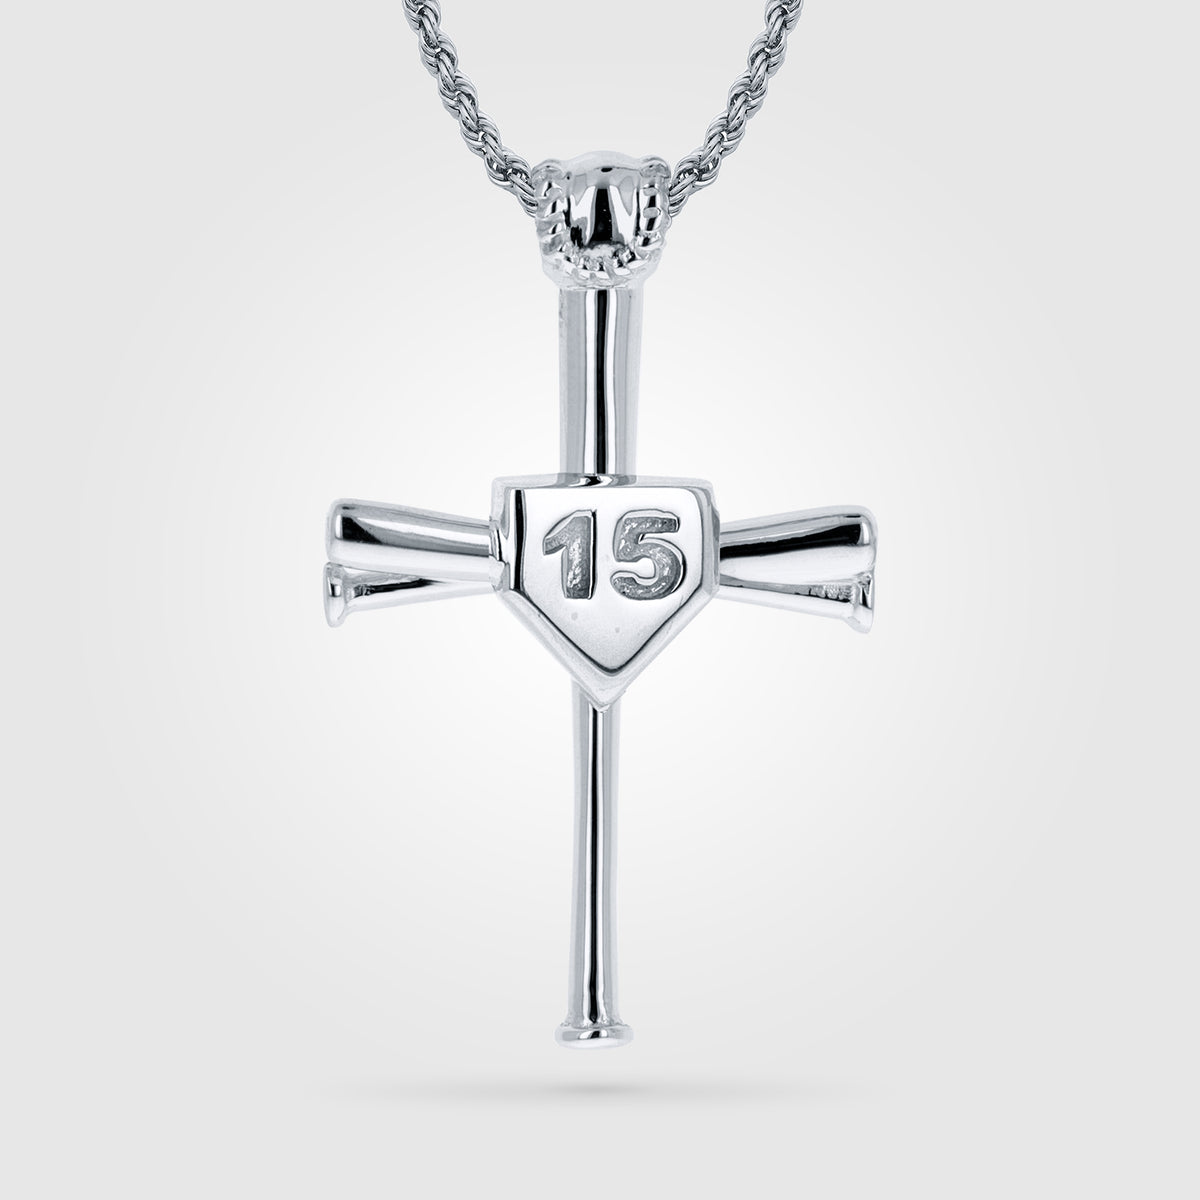 00-99 Baseball Bat Cross Necklaces for Boys with Number Stainless Steel  Athletes Pendant Silver Chain Teen Men's Softball Decor Equipment Youth  Girls Outdoor Sport Fans Jewelry Gift Customized | Wish